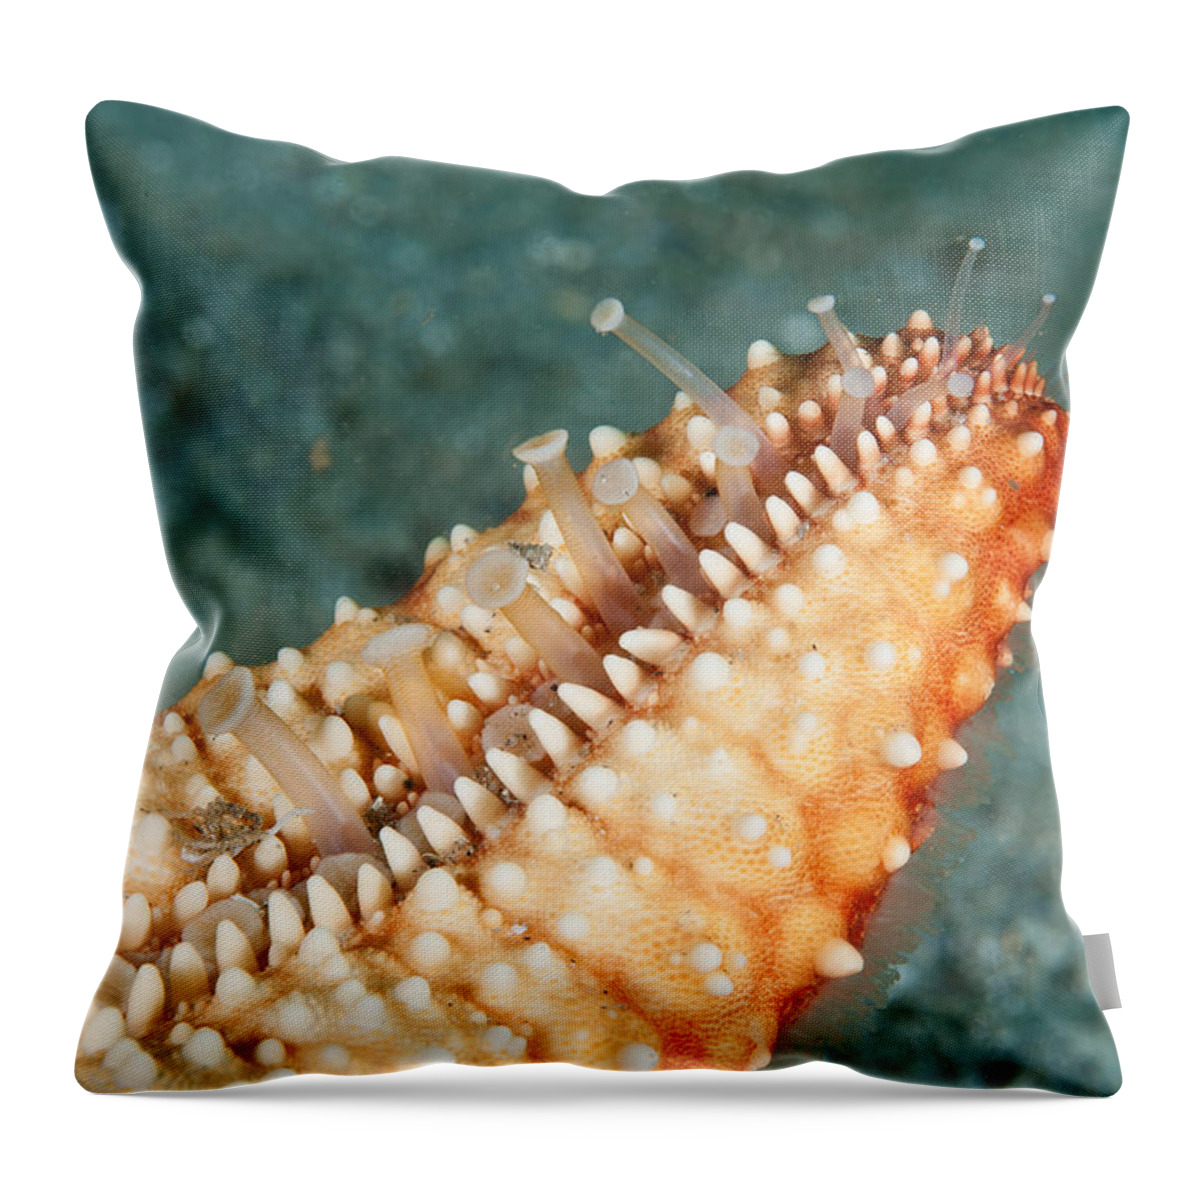 Animal Throw Pillow featuring the photograph Tube Feet Of Cushion Sea Star by Andrew J. Martinez